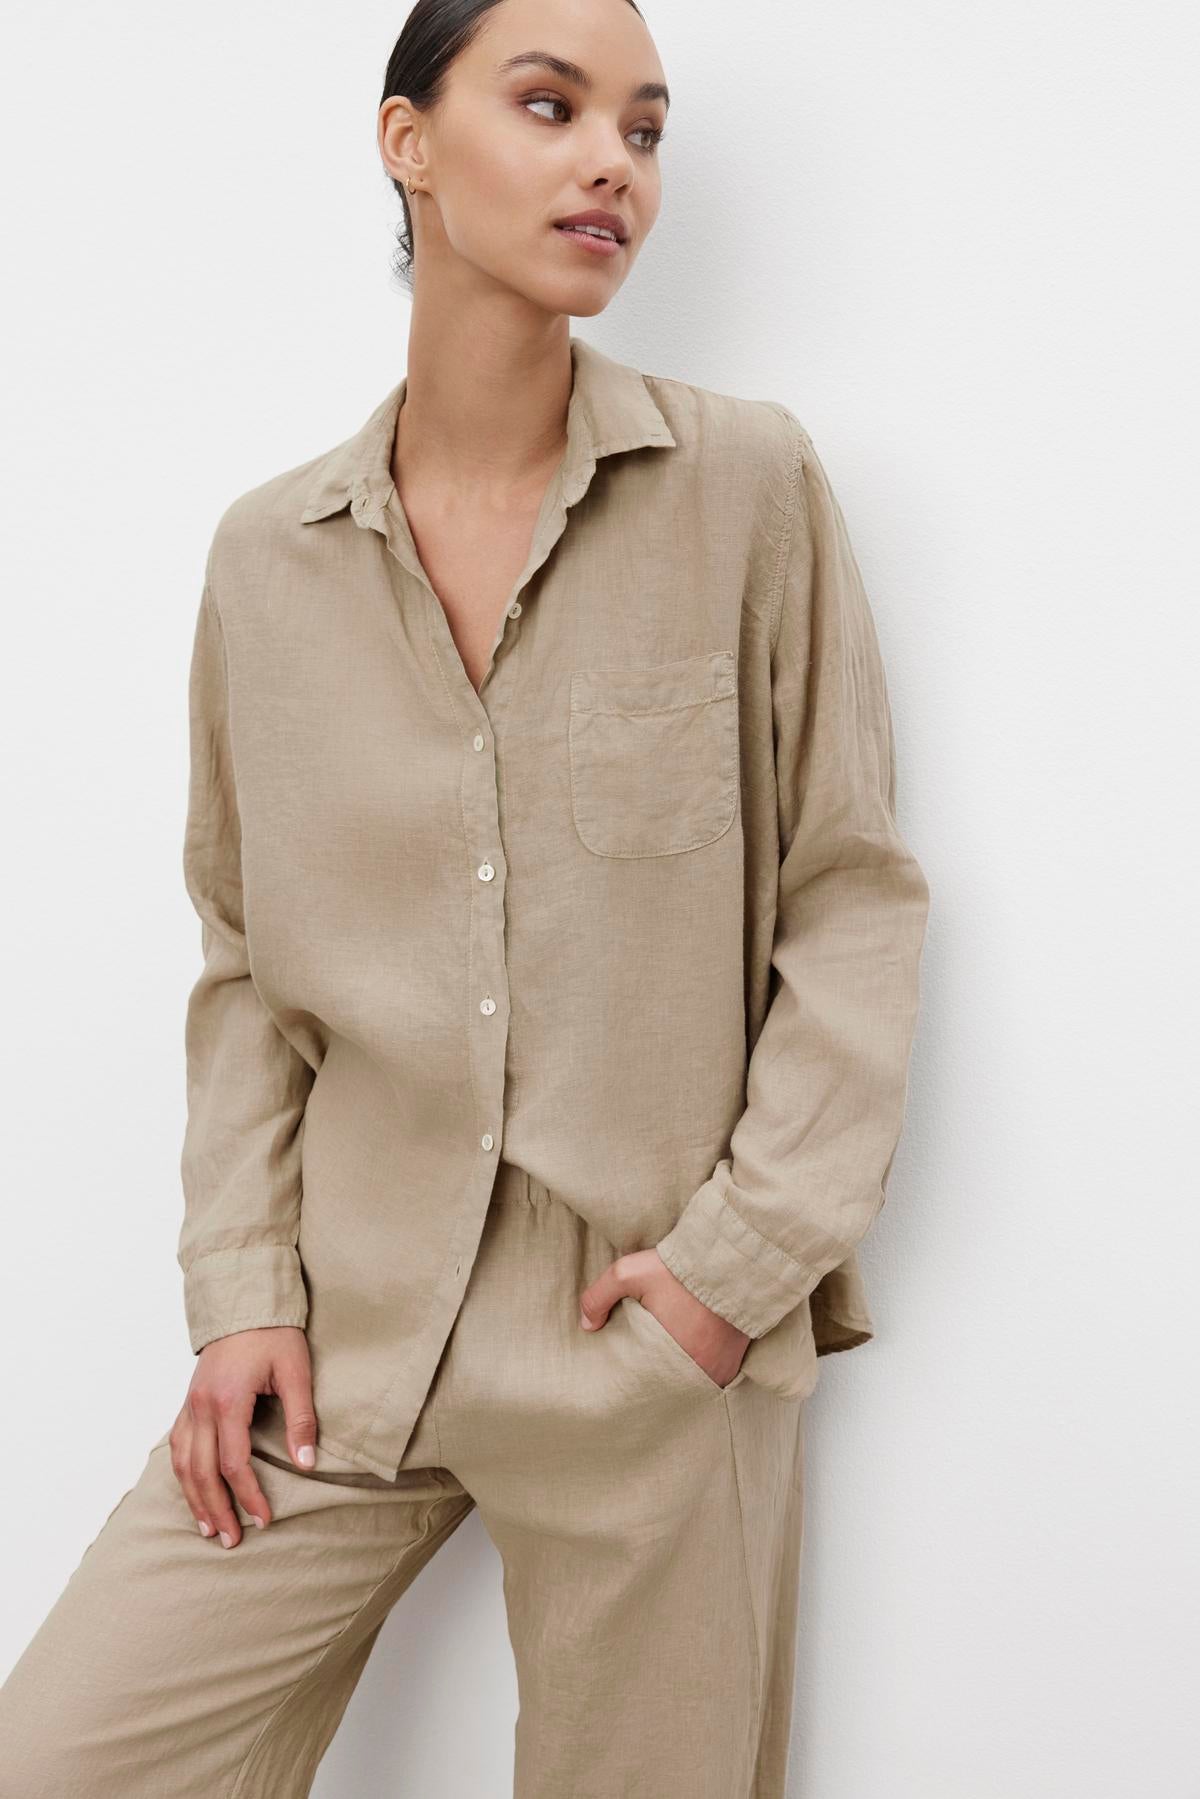 A woman wearing a relaxed silhouette, casual beige linen Mulholland shirt by Velvet by Jenny Graham with a scooped hemline and matching pants.-36463469658305